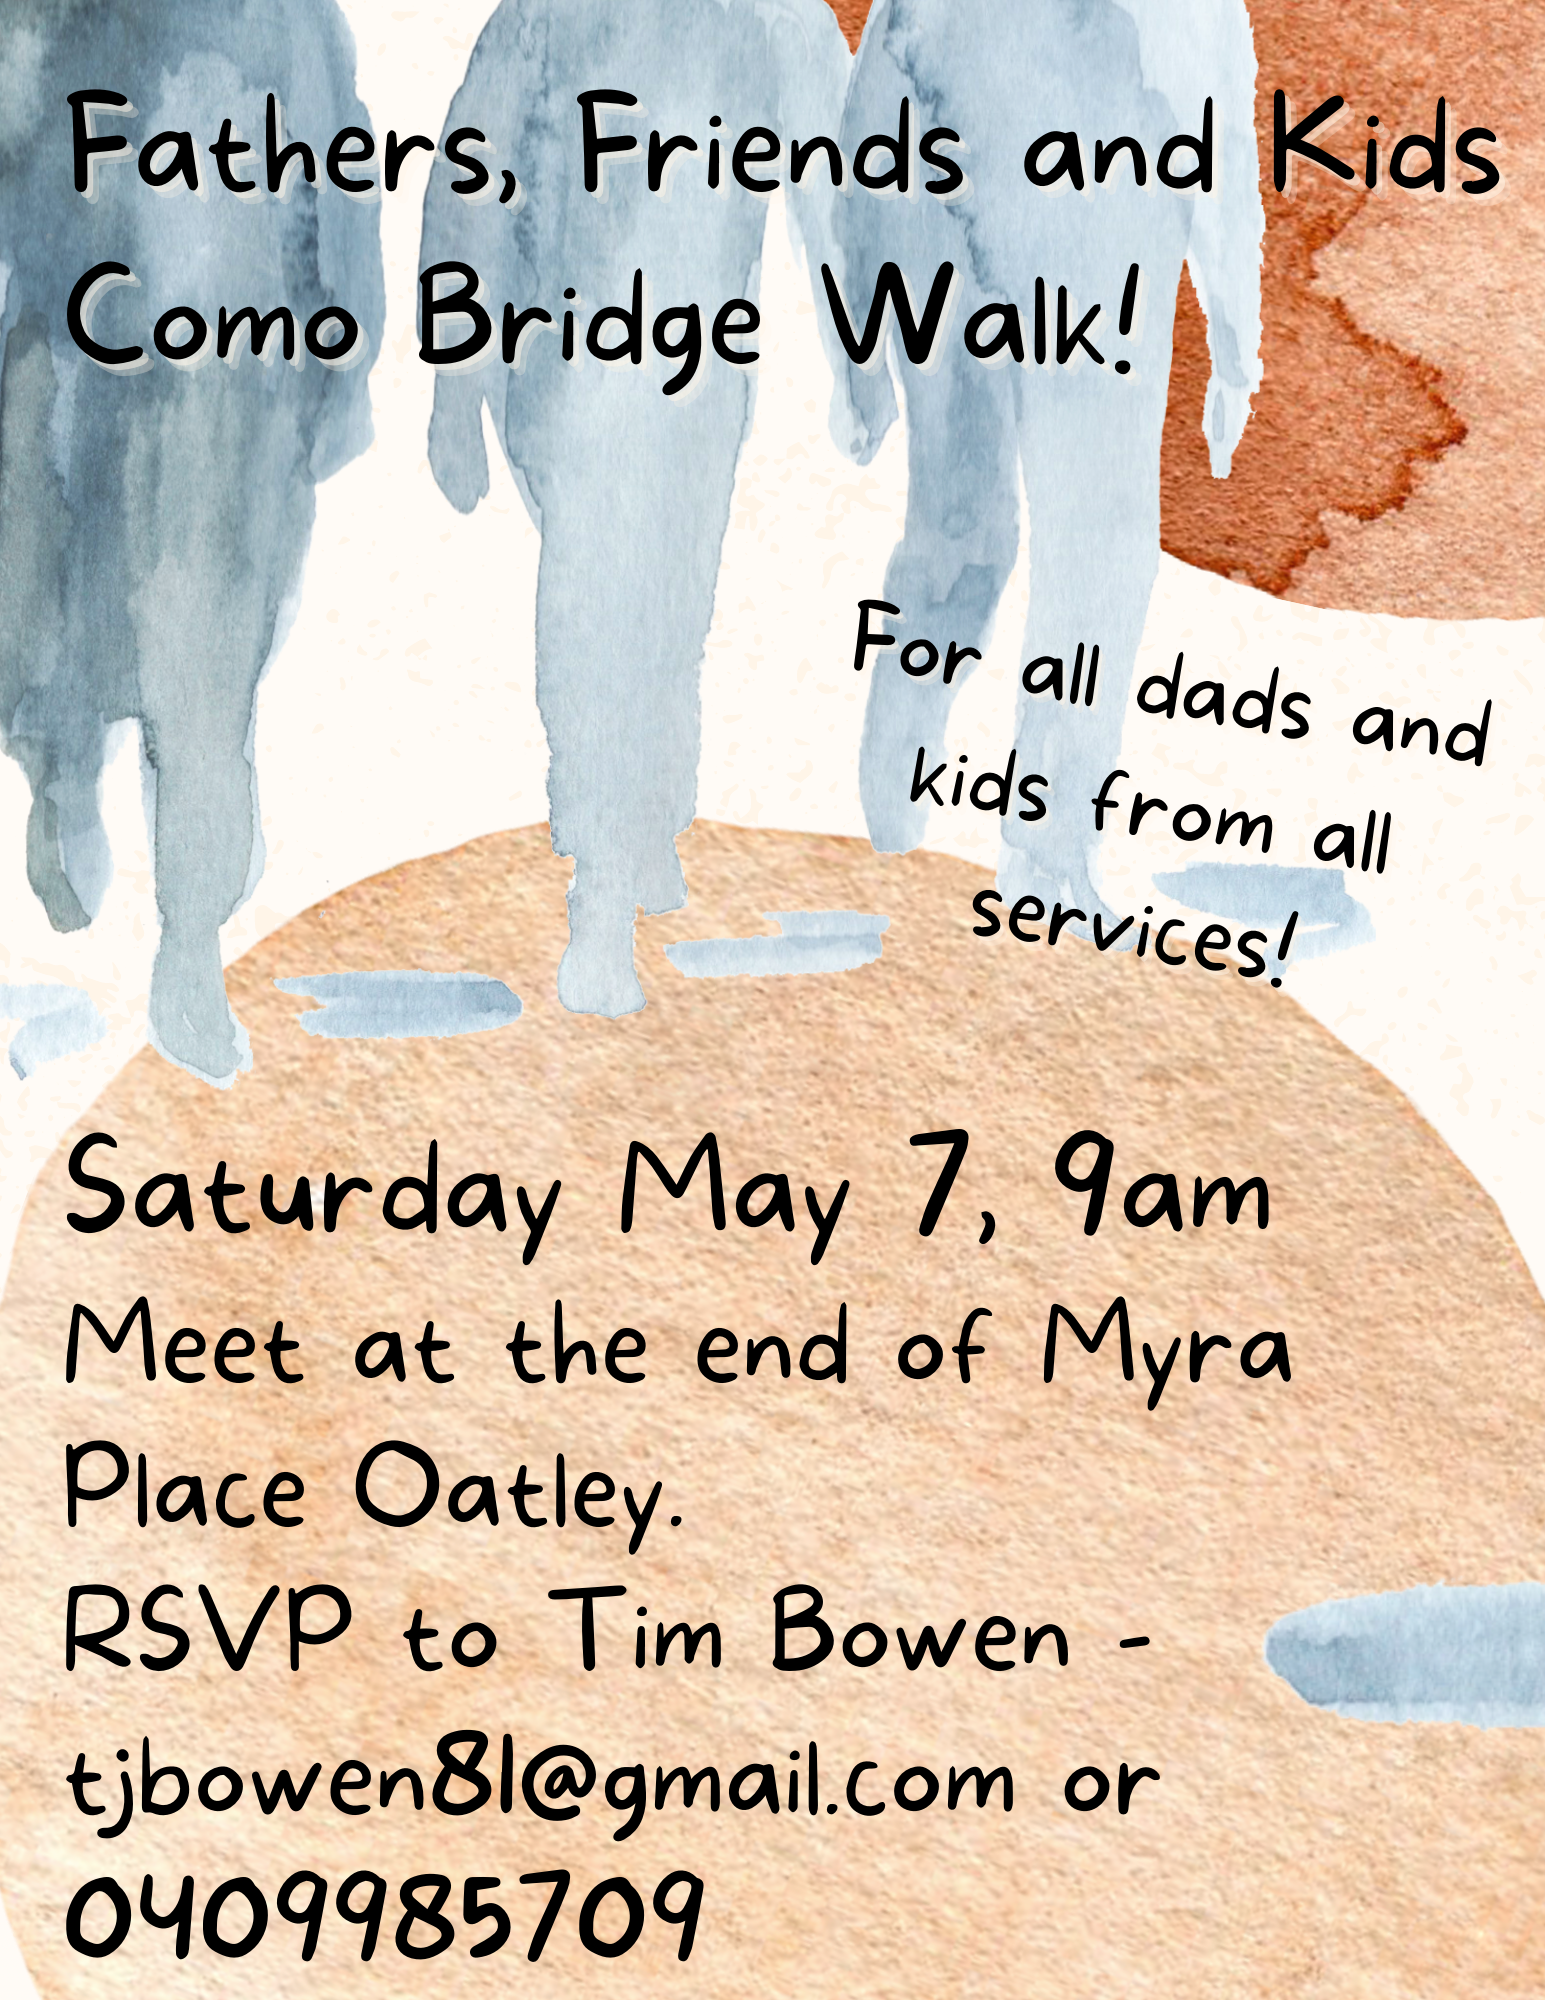 Families and Friends- All Age Dads Bridge Walk